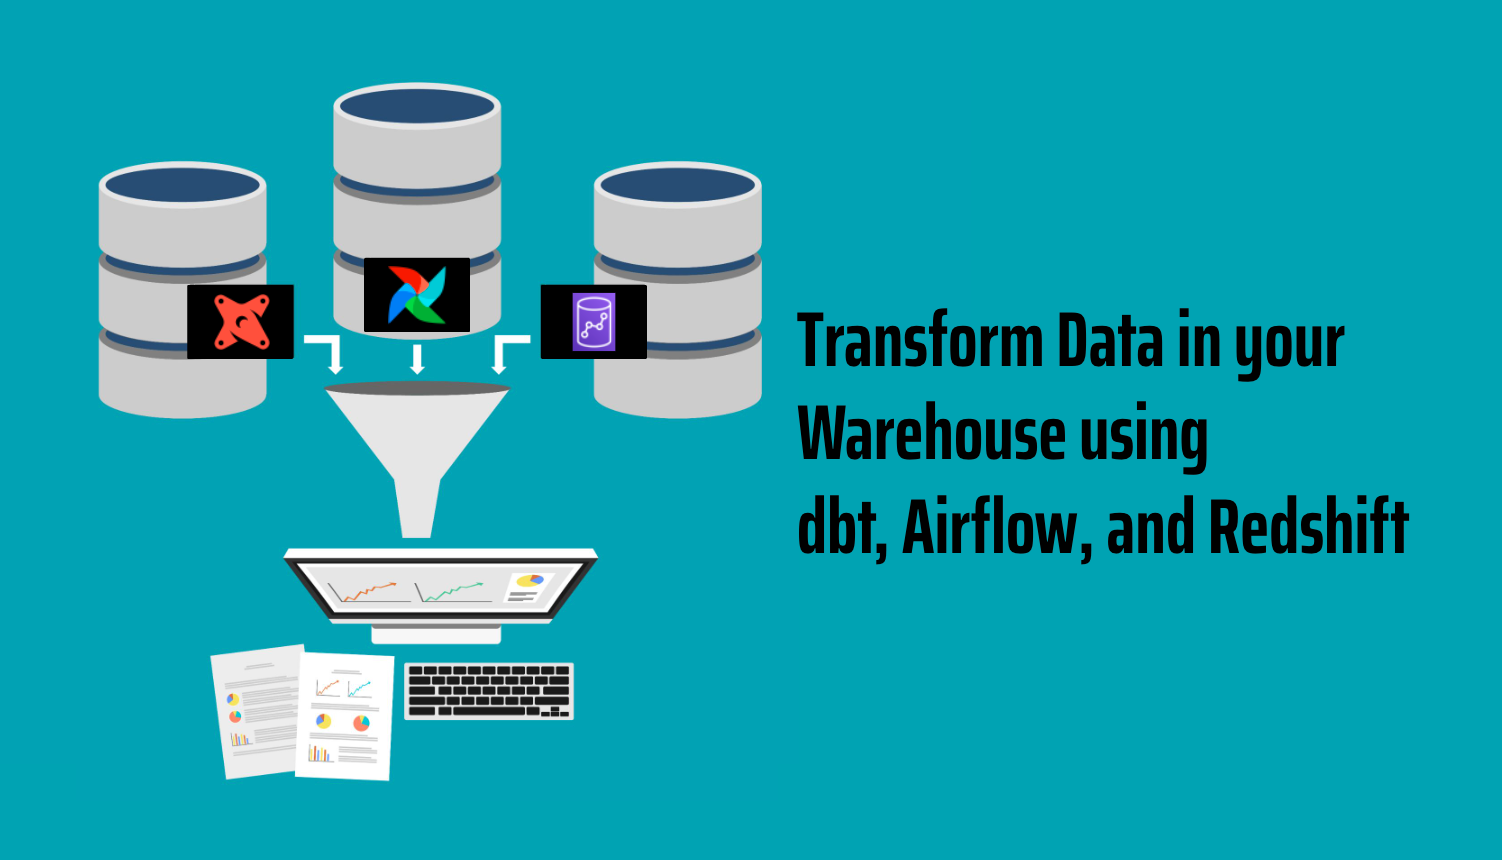 Transform Data in your Warehouse using dbt, Airflow, and Redshift